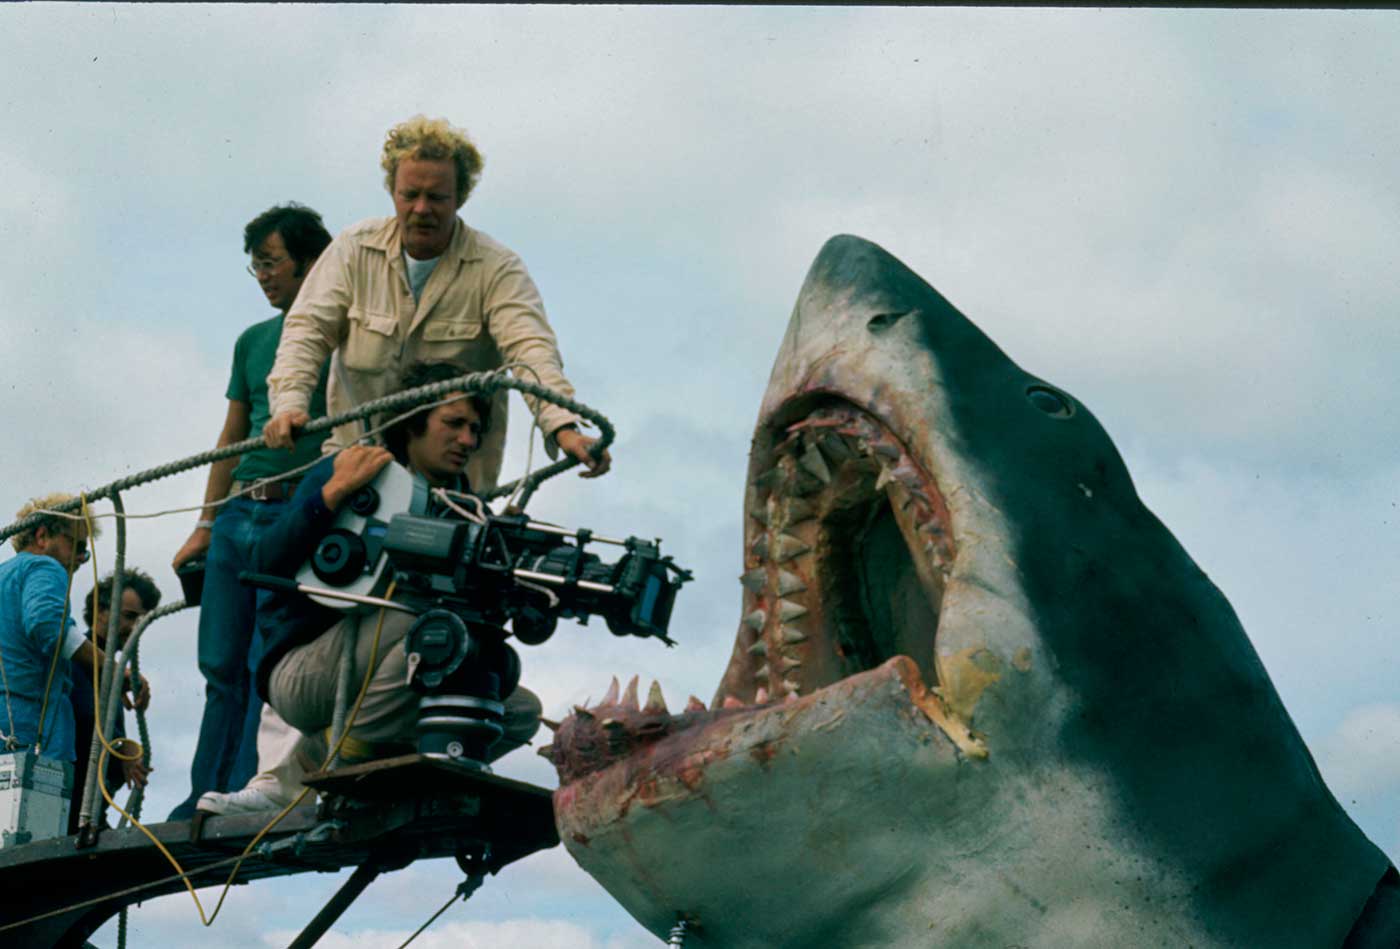 Jaws' Turns 47: Where is Bruce, the Animatronic Shark from the Movie, Now?  | iTech Post